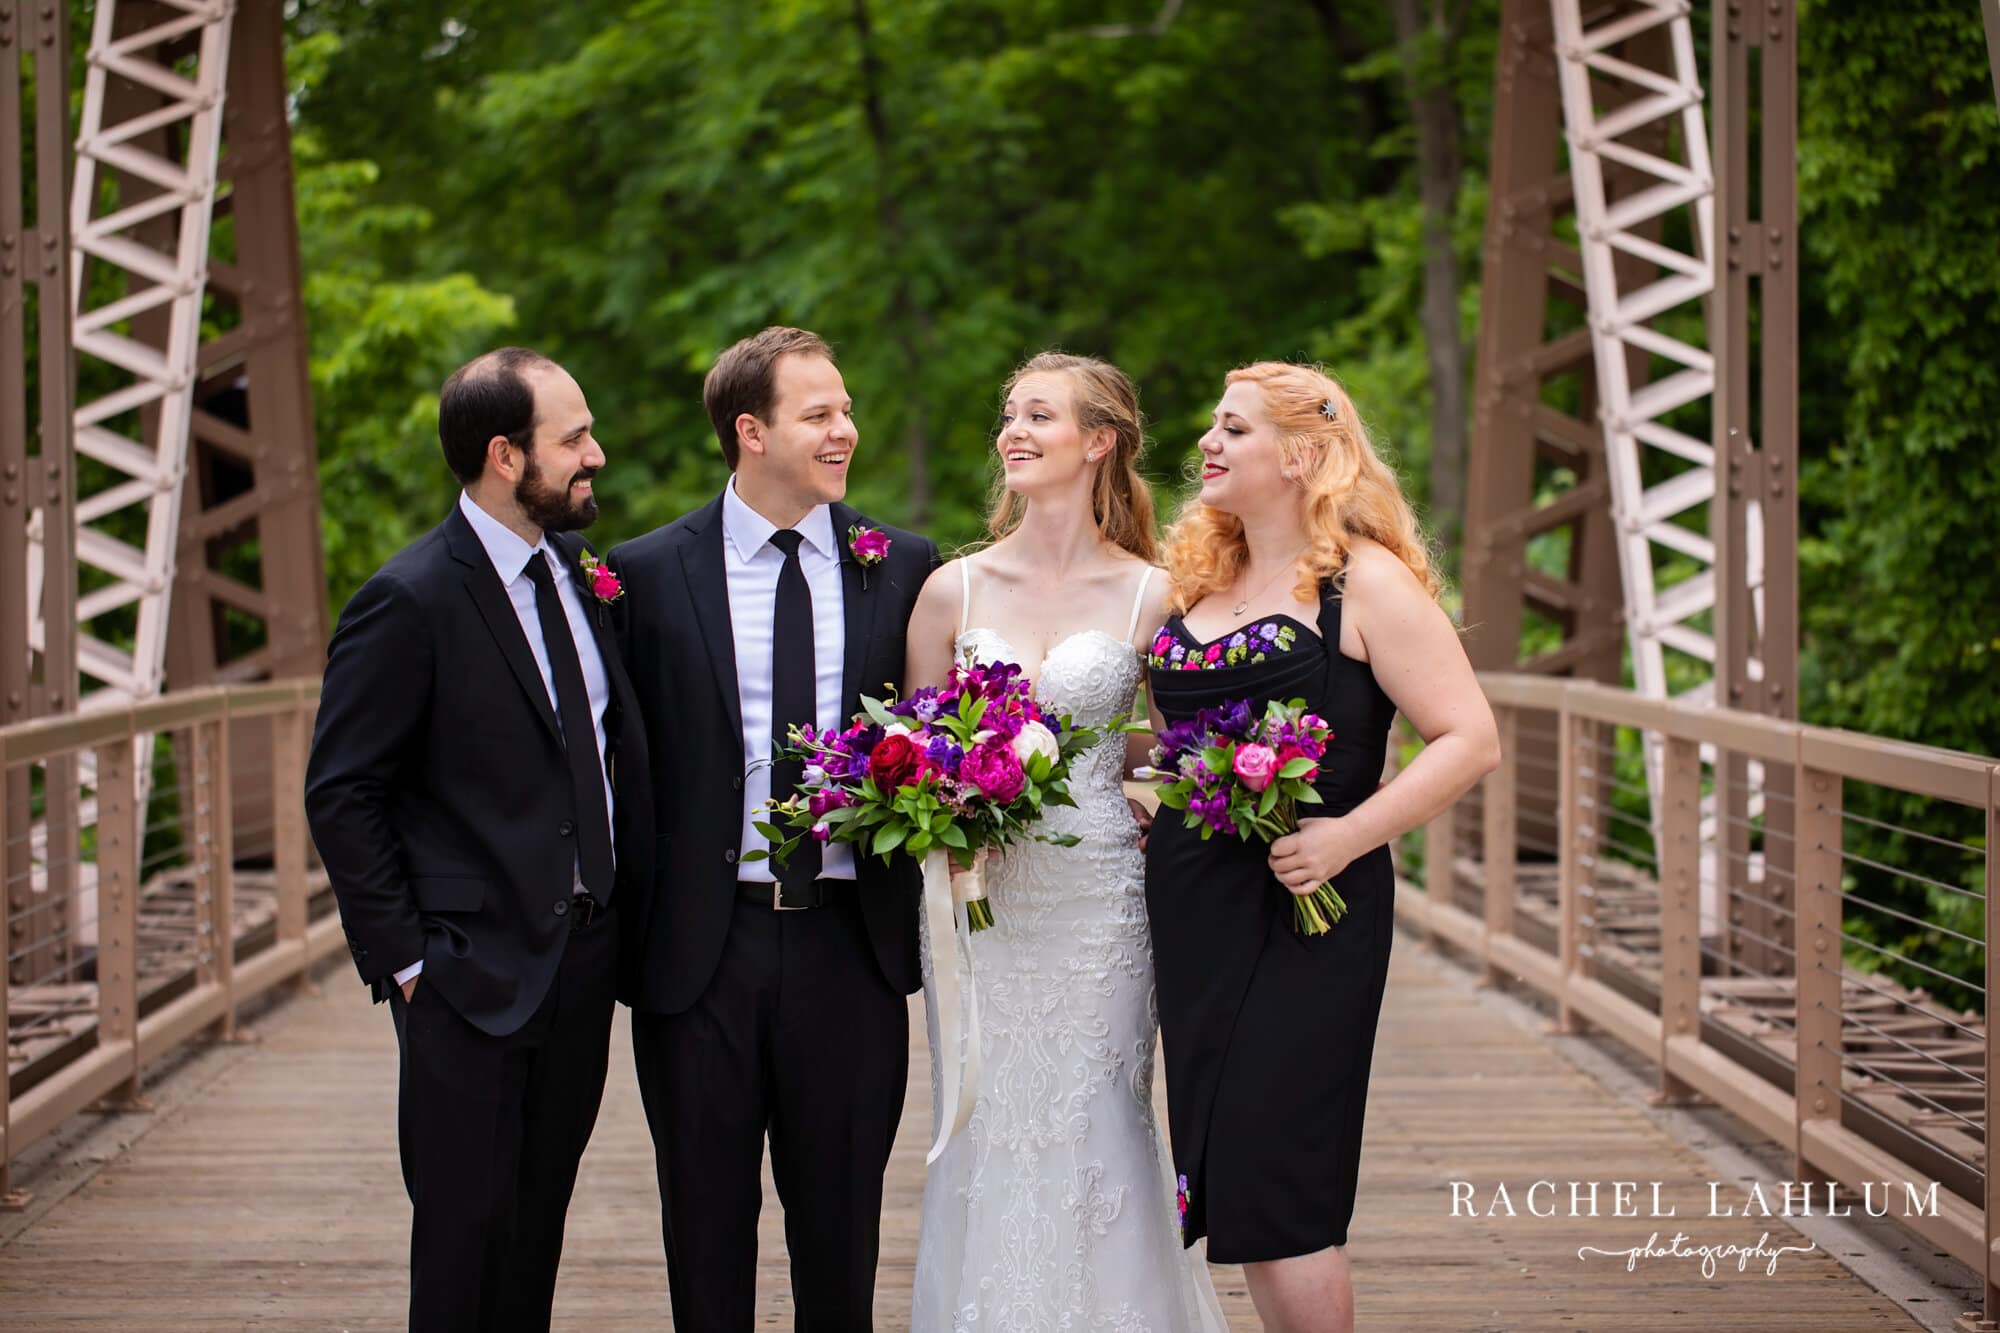 Best man, groom, bride, and maid of honor pose for a wedding portrait on a bridge. 